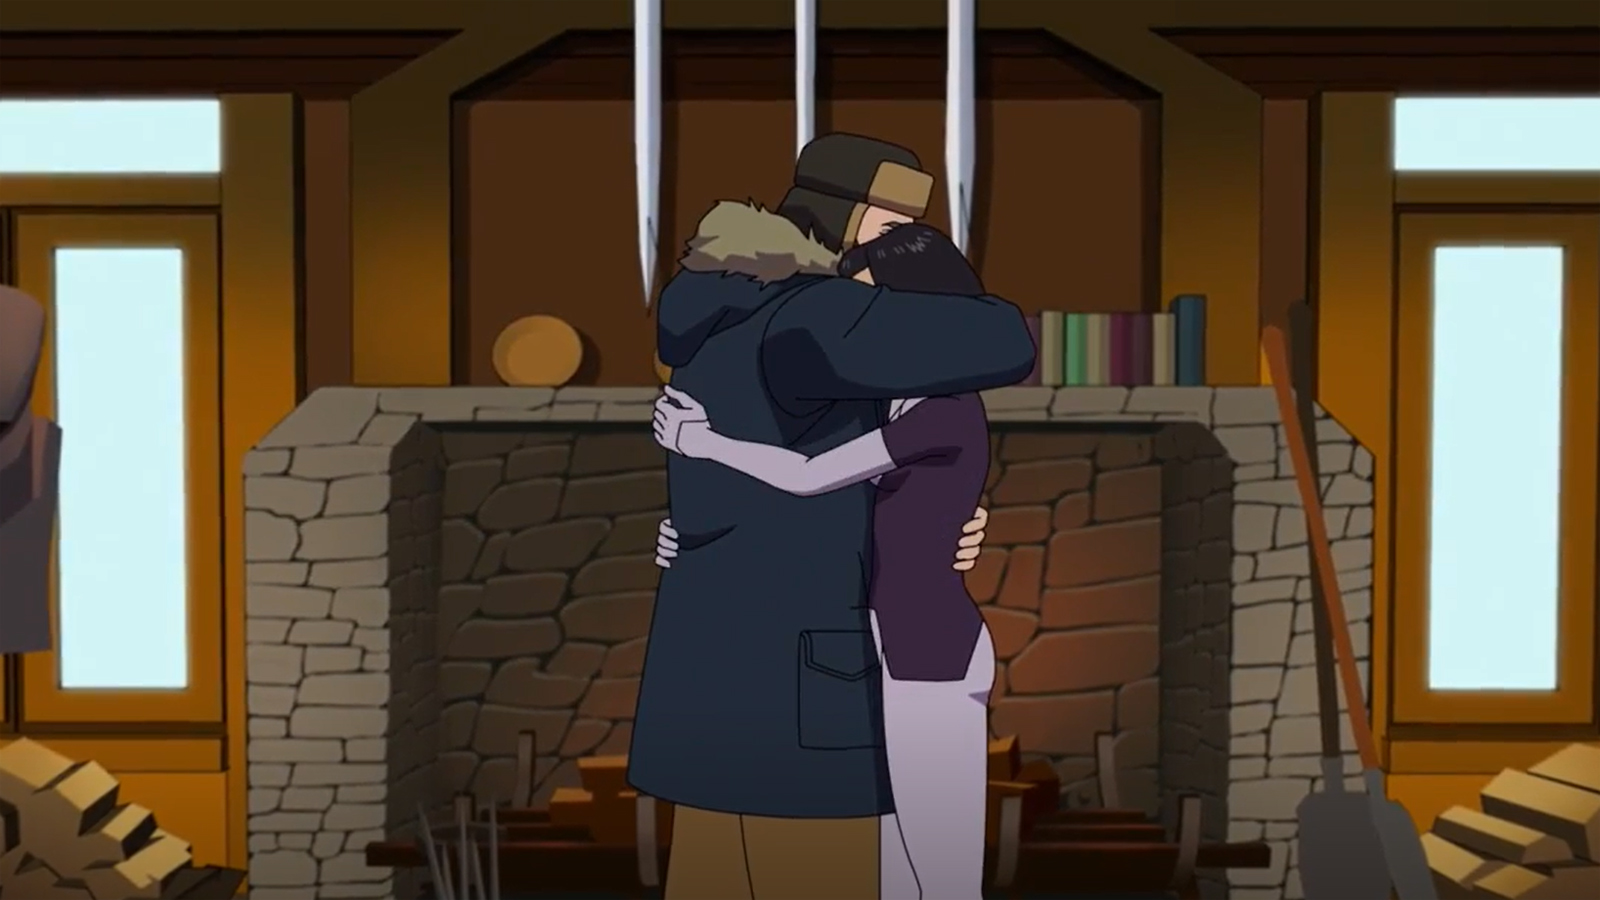 The Immortal and Dupli-Kate hug in his wooden hut in Invincible season 2 episode 8